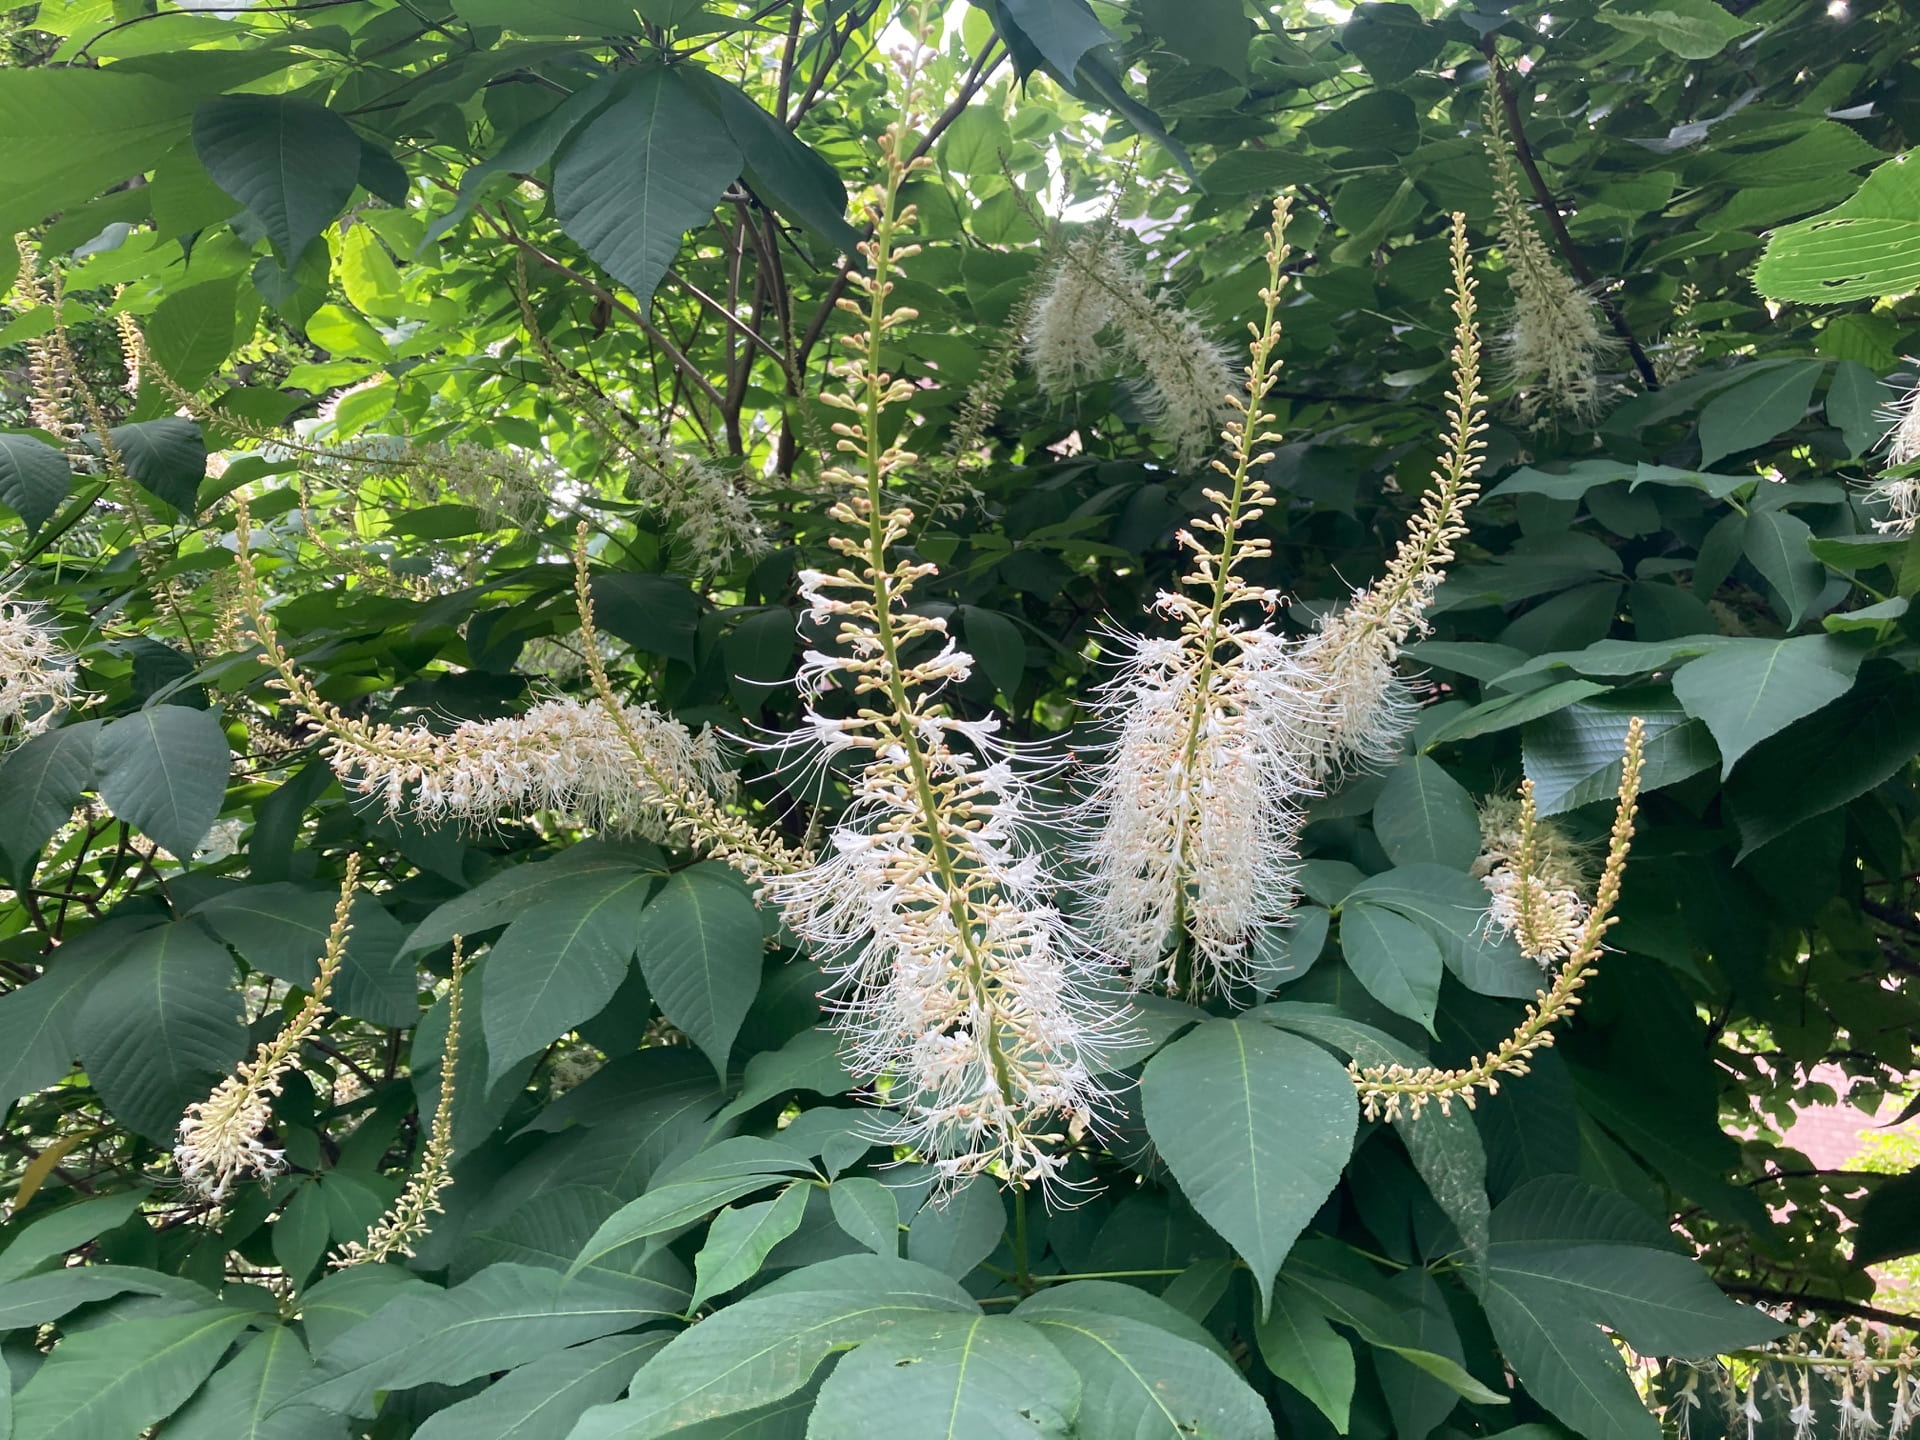 The large inflorescences of Aesculus parviflora give it its common name, the bottlebrush buckeye.